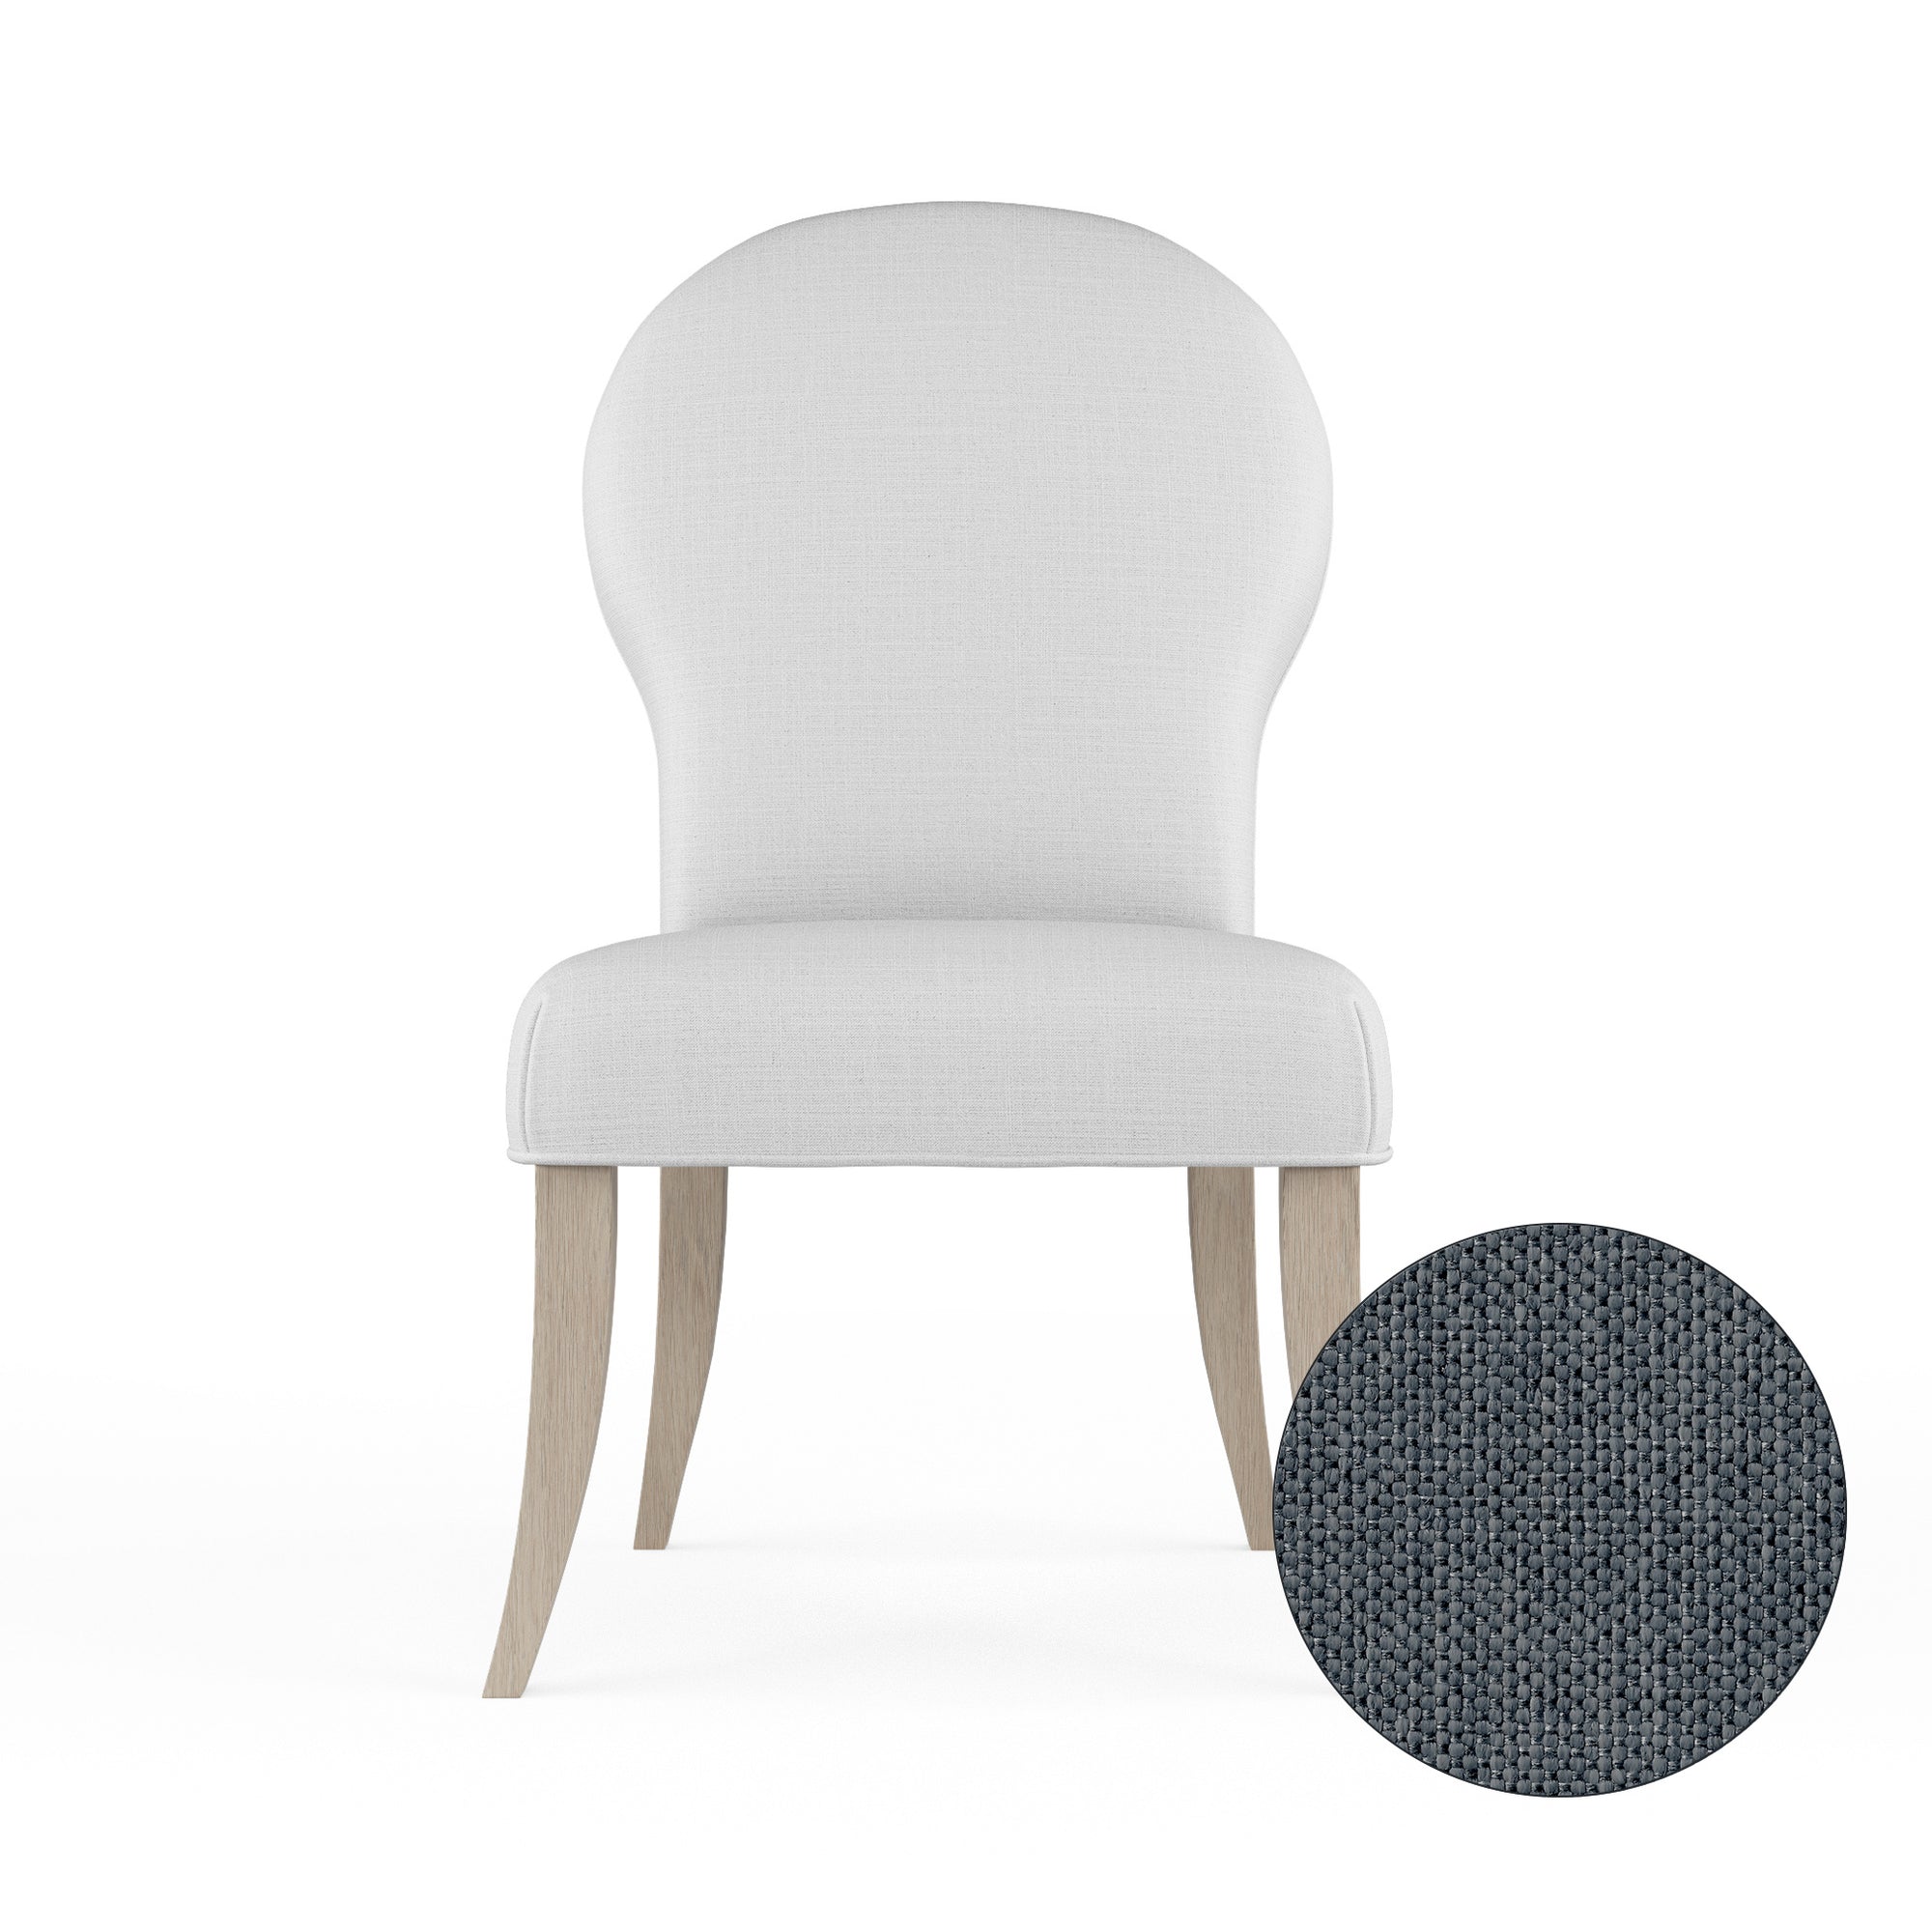 Caitlyn Dining Chair - Bluebell Pebble Weave Linen